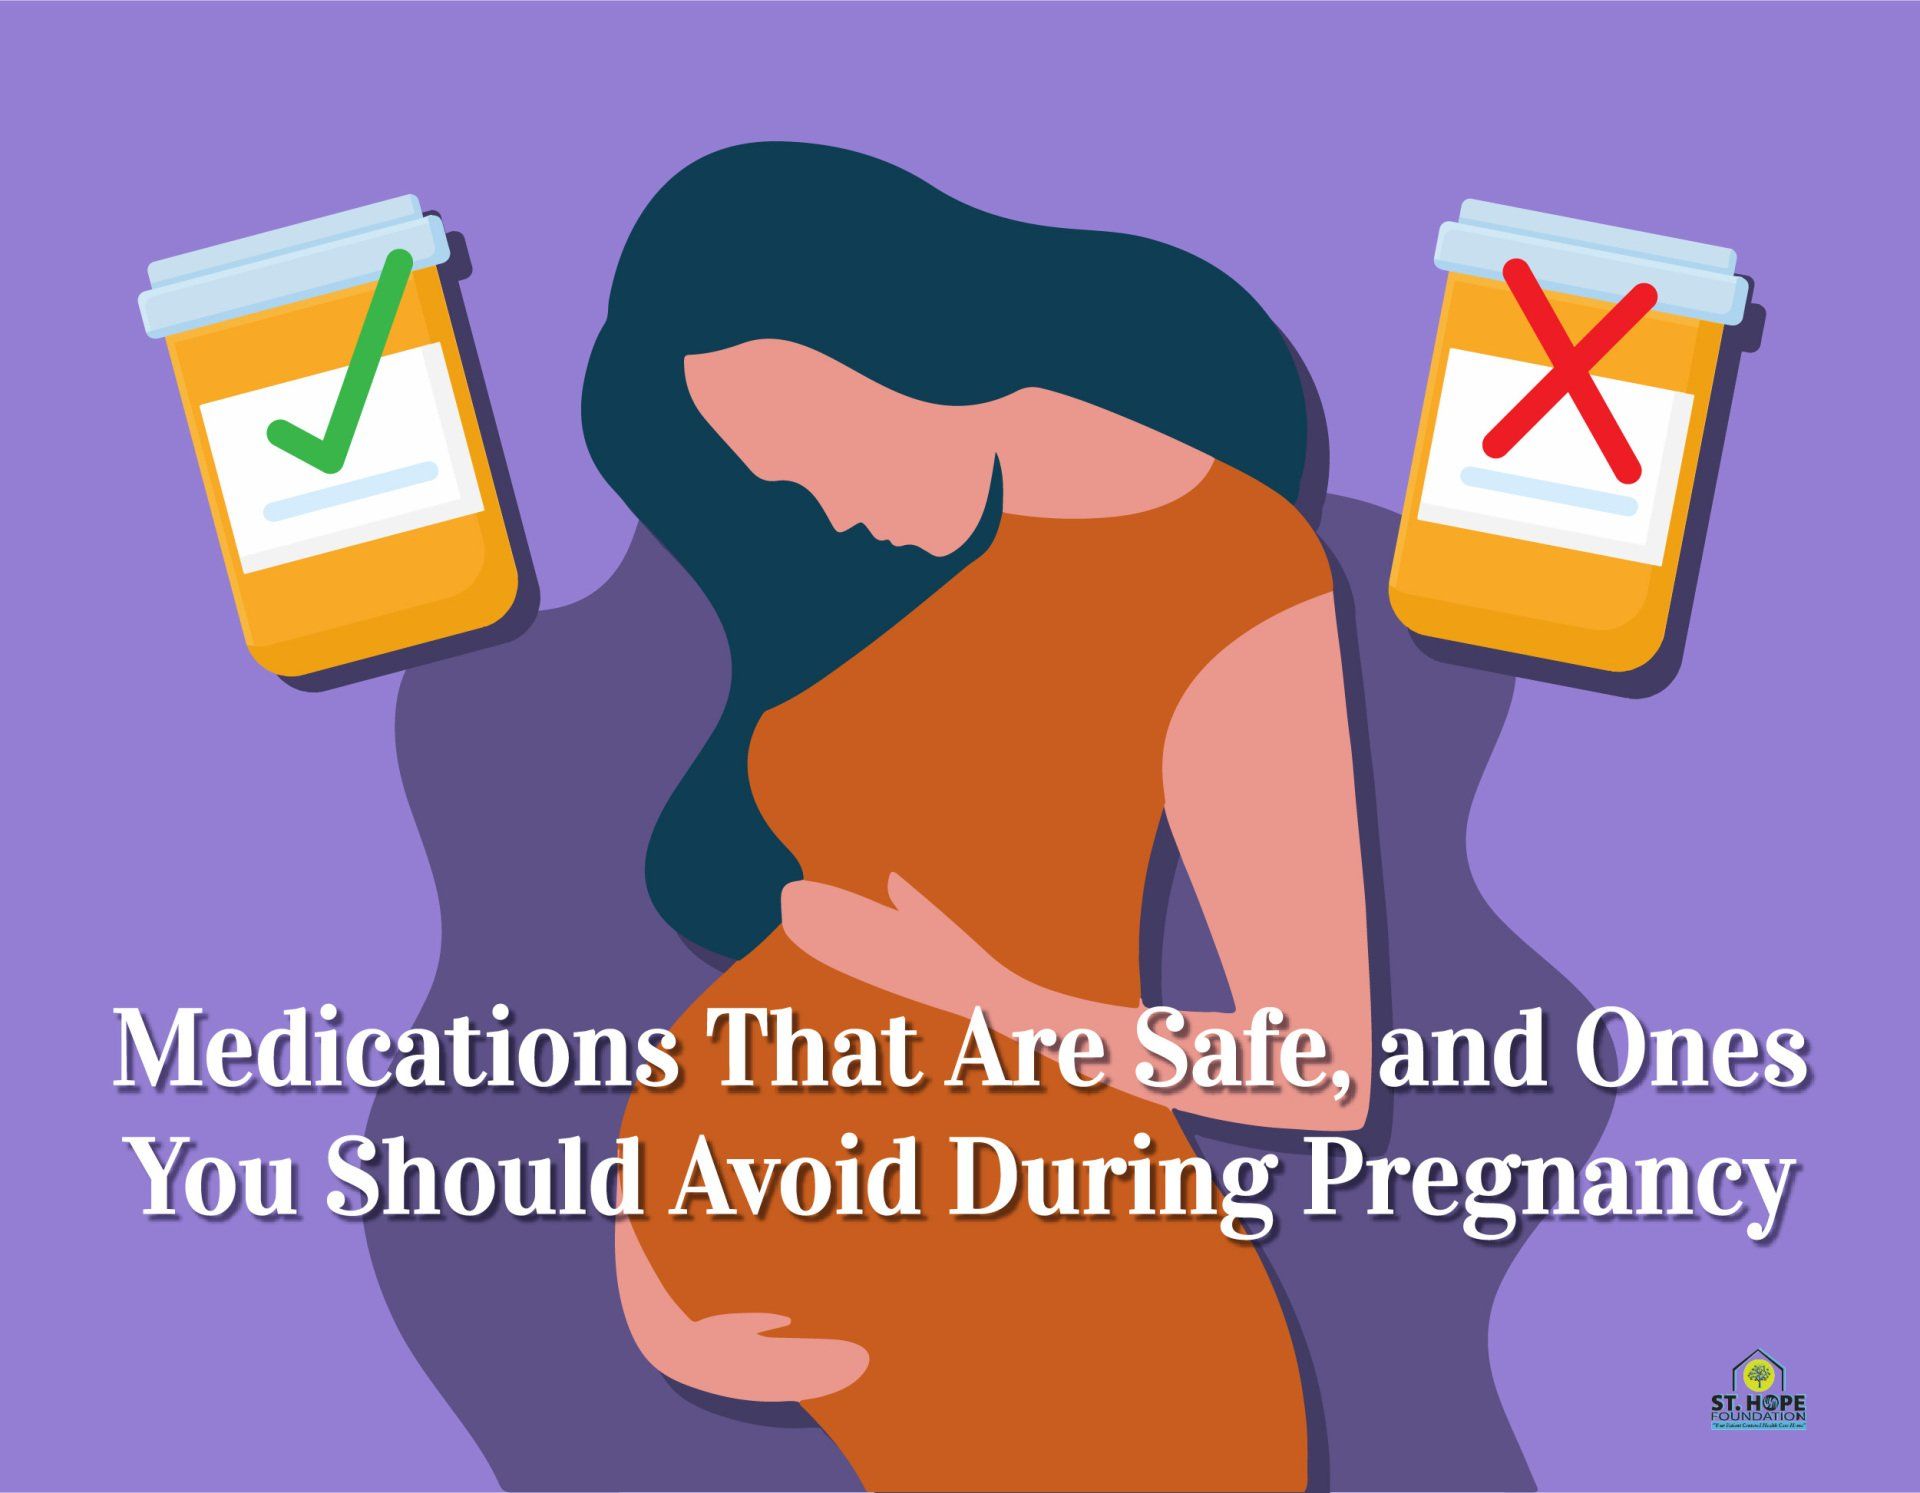 medications that are safe and unsafe during pregnancy